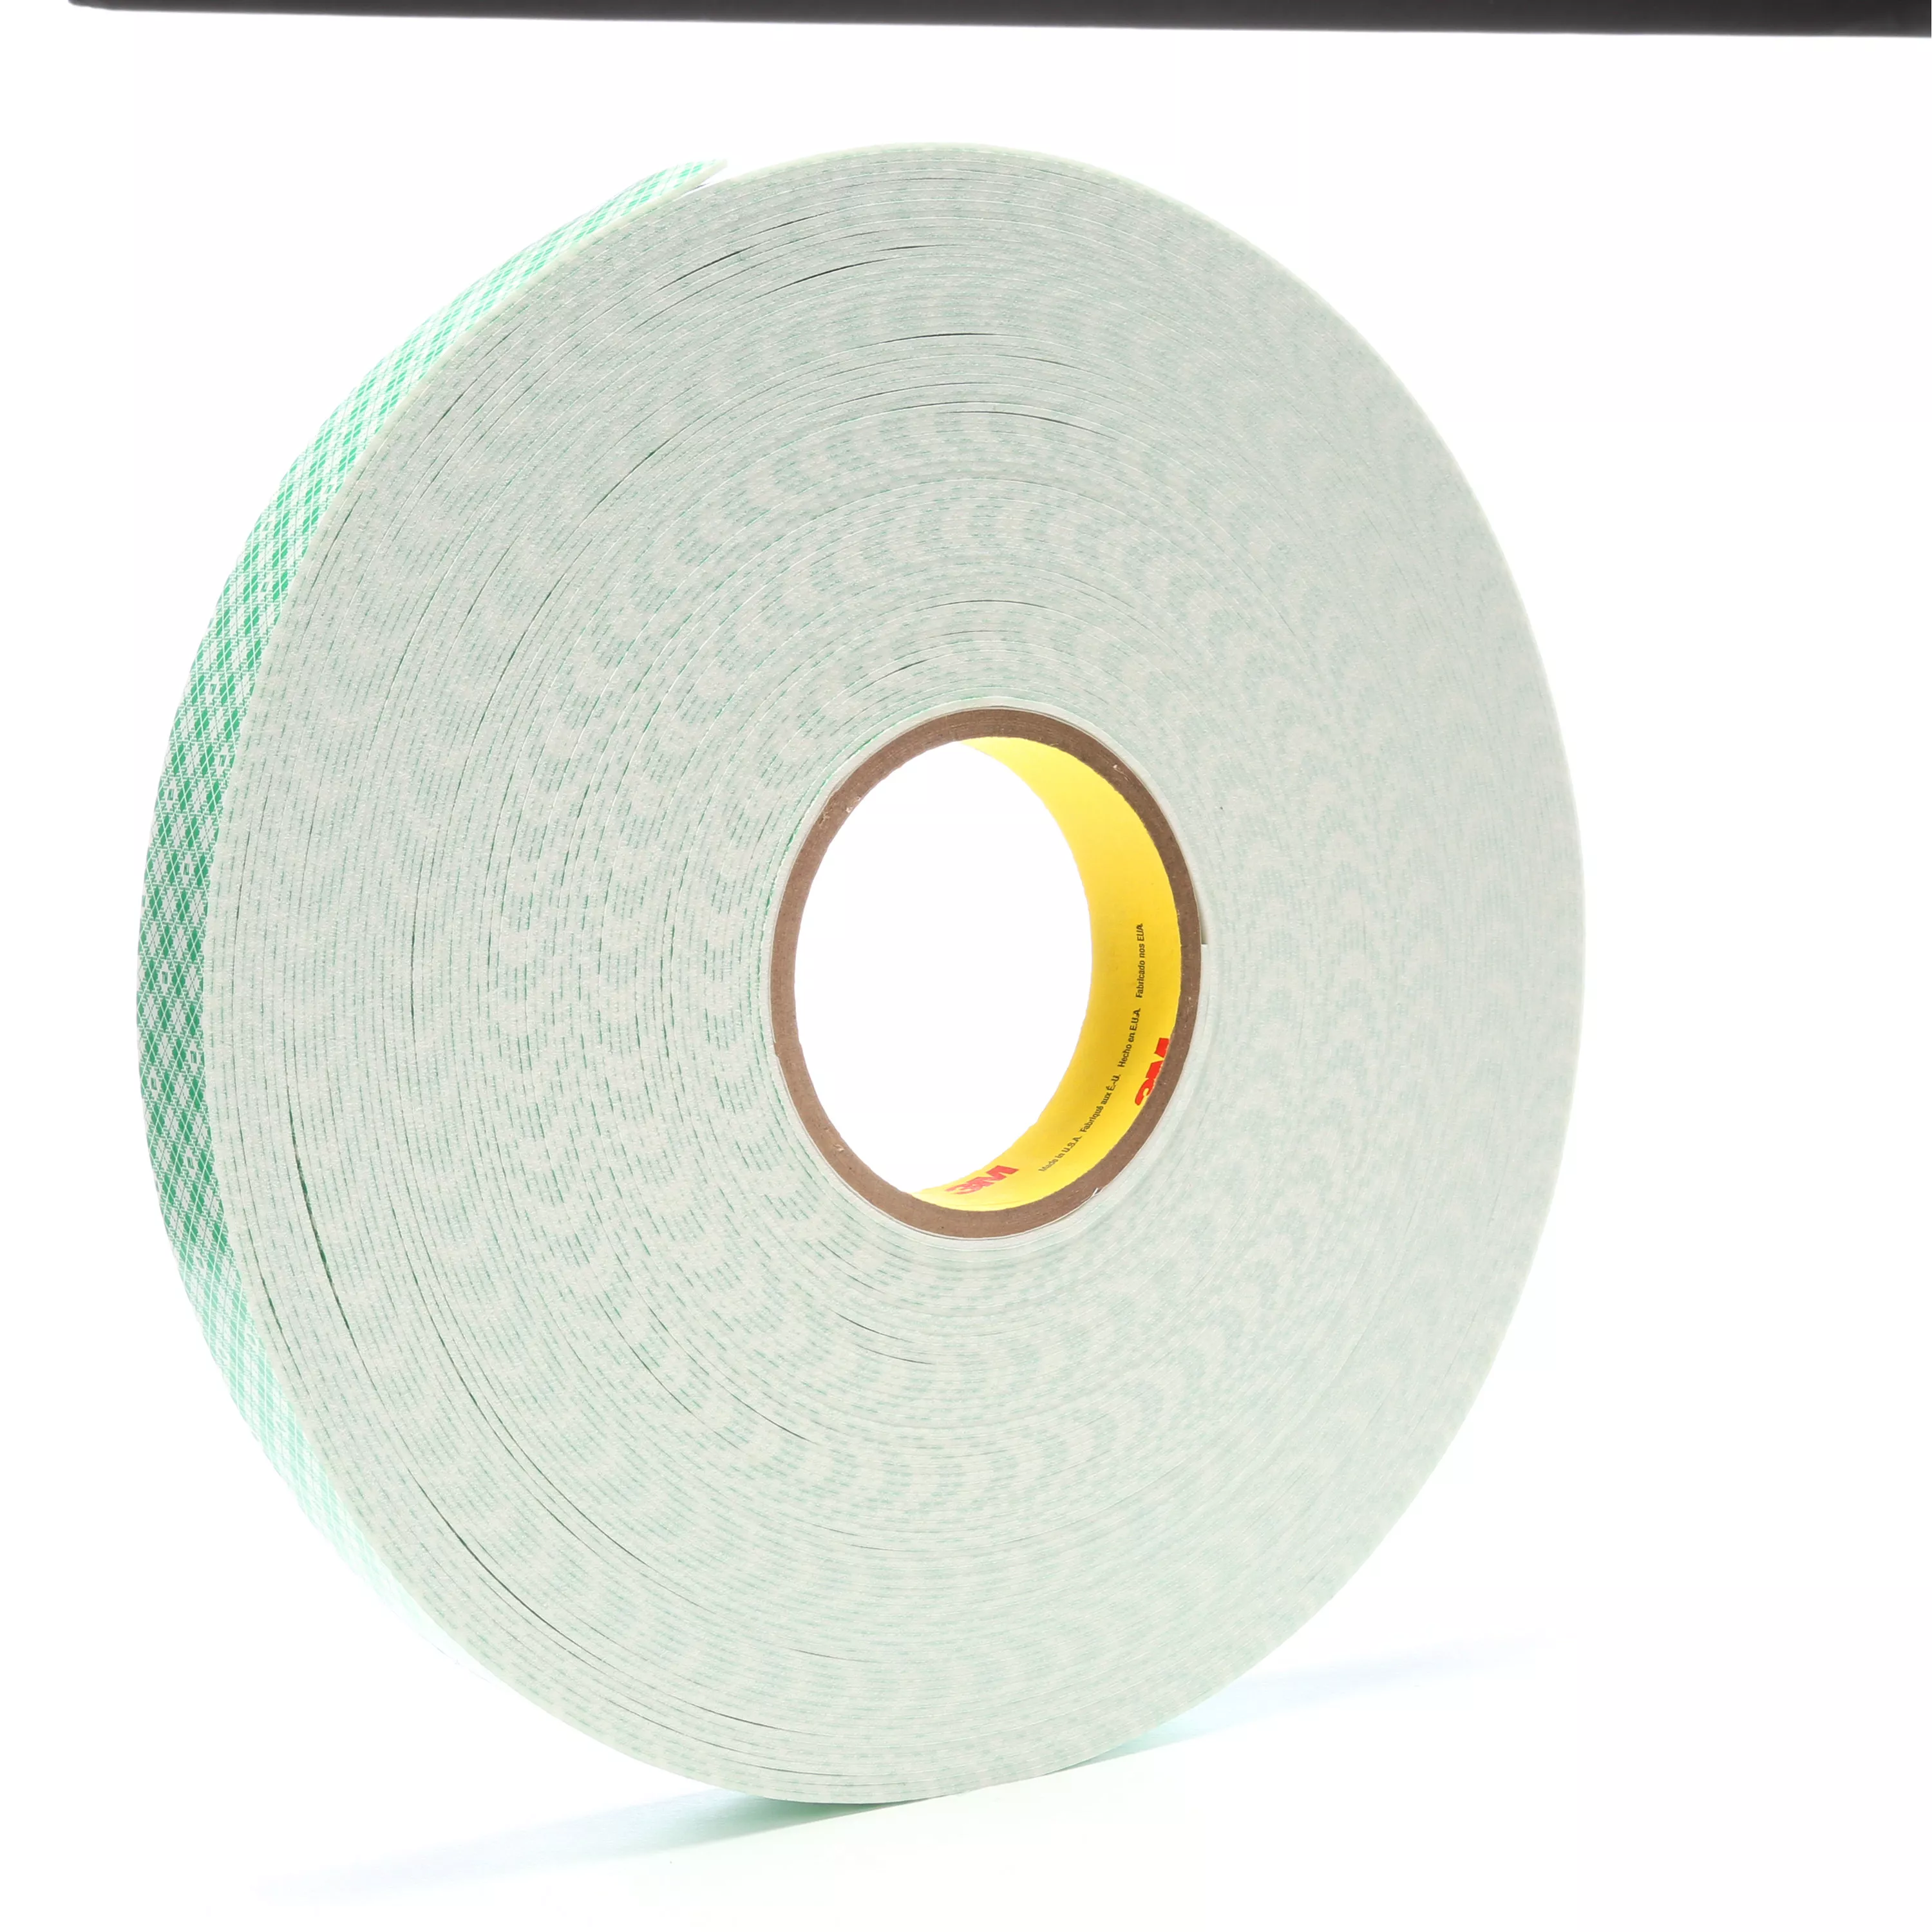 3M™ Double Coated Urethane Foam Tape 4016, Off White, 1 in x 36 yd, 62
mil, 9 Roll/Case